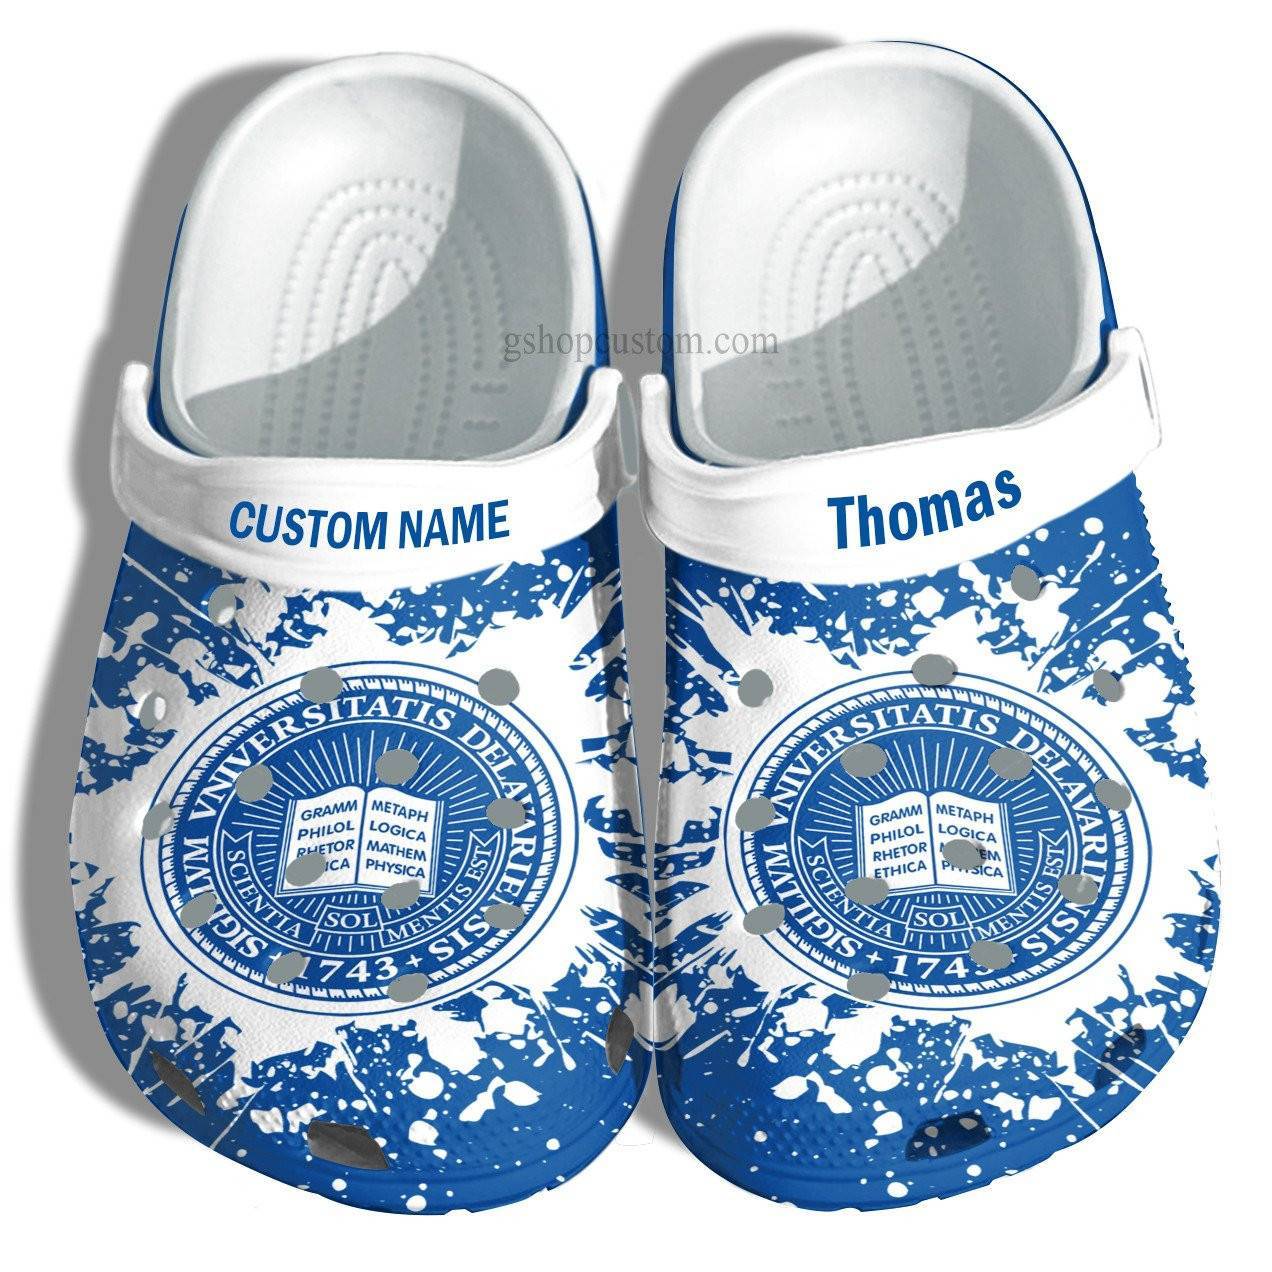 University Of Delaware Graduation Gifts Croc Shoes Customize – Admission Gift Crocss Shoes